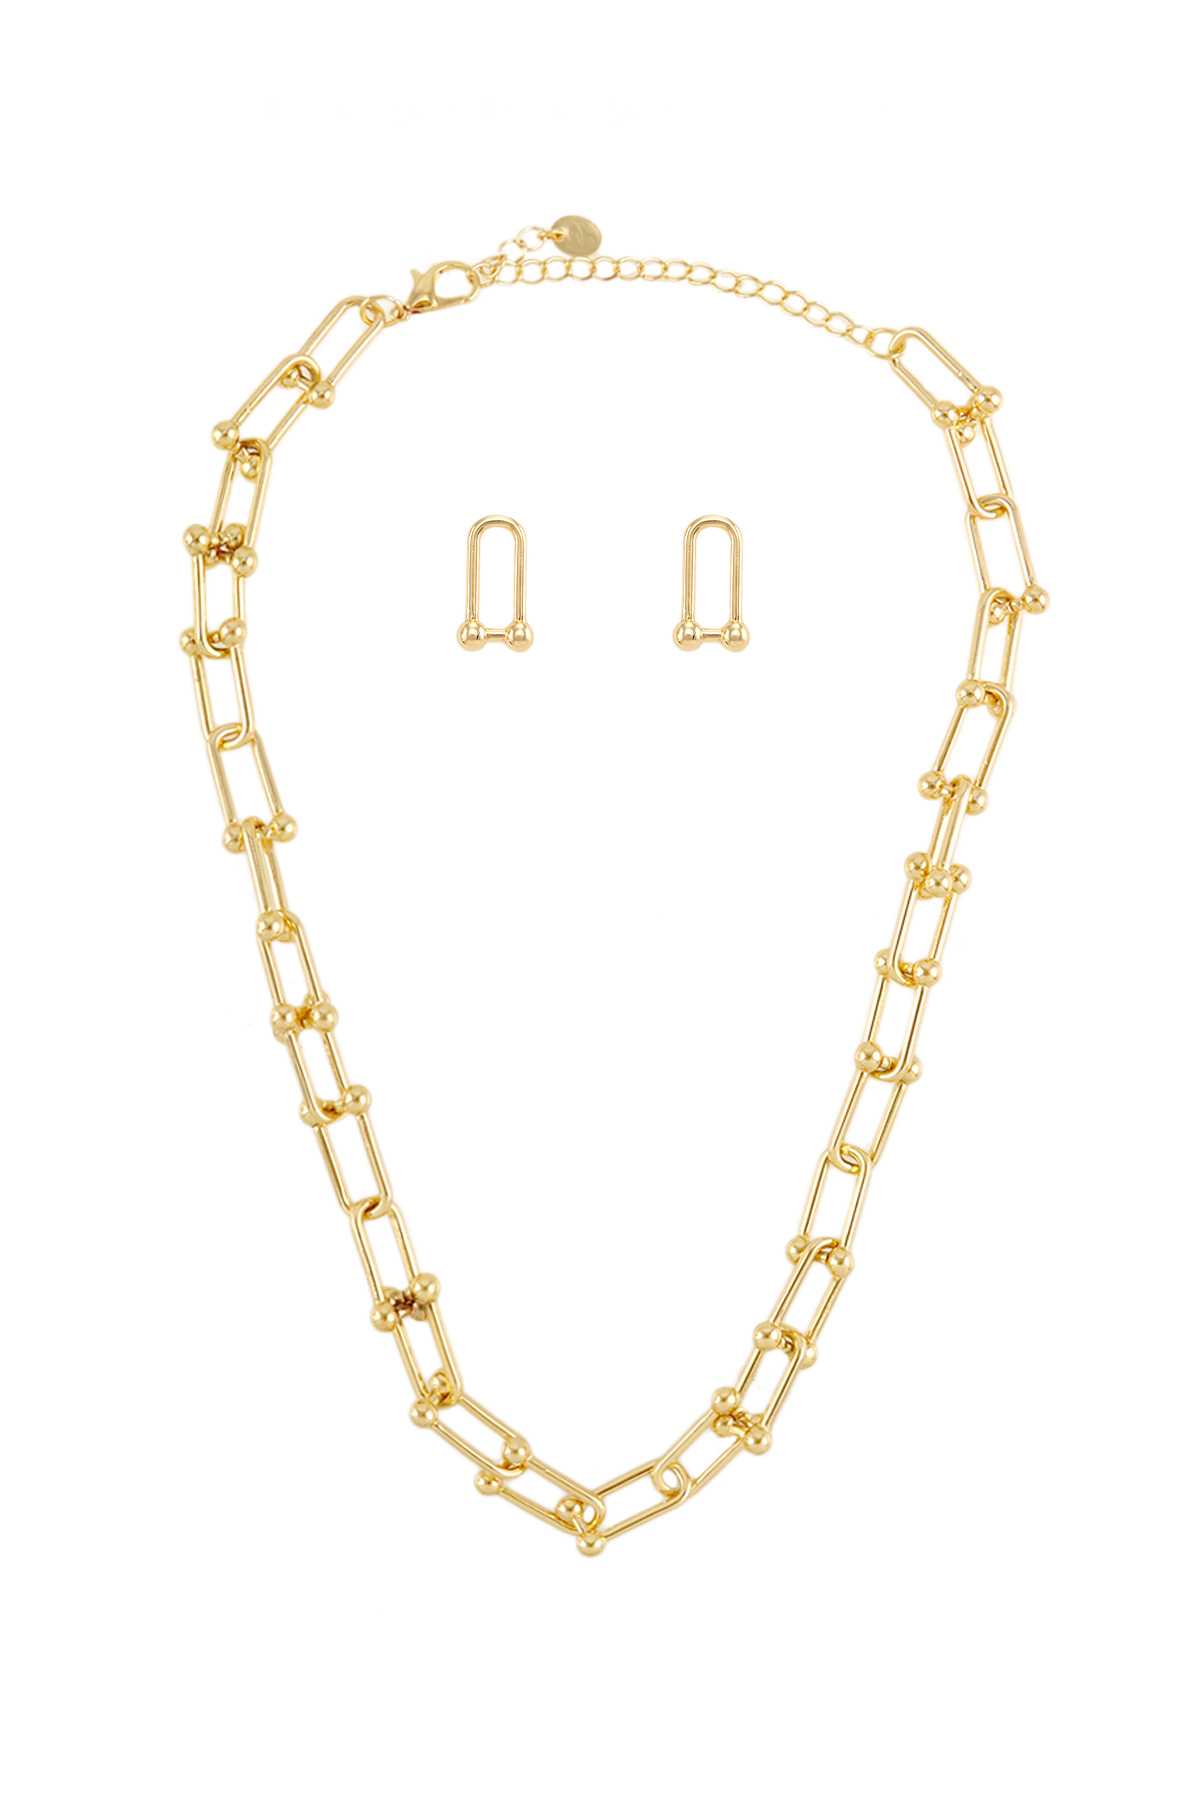 Geometric Oval Chain Linked Necklace Set